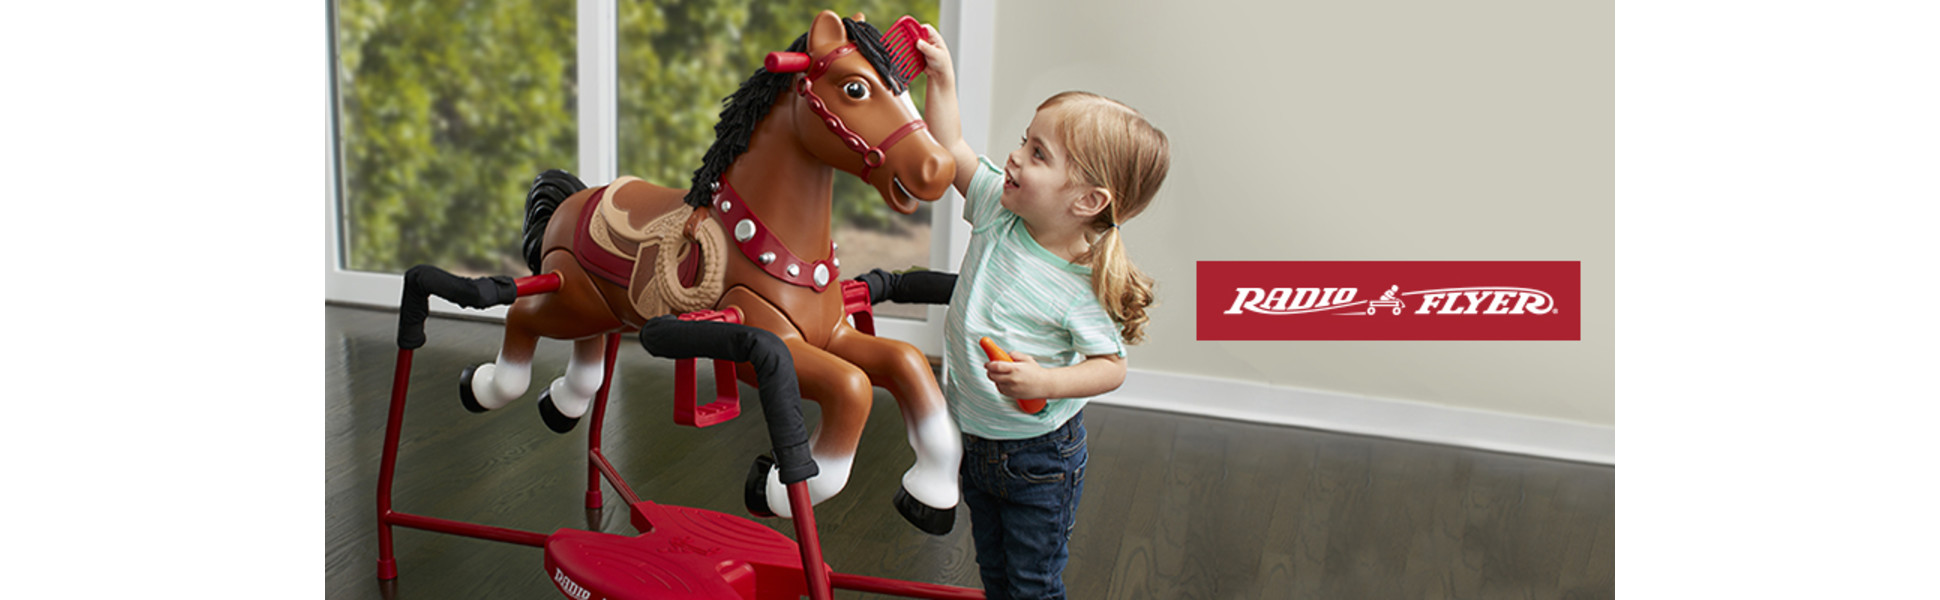 Radio Flyer, Blaze Interactive Spring Horse, Ride-on with Sounds 